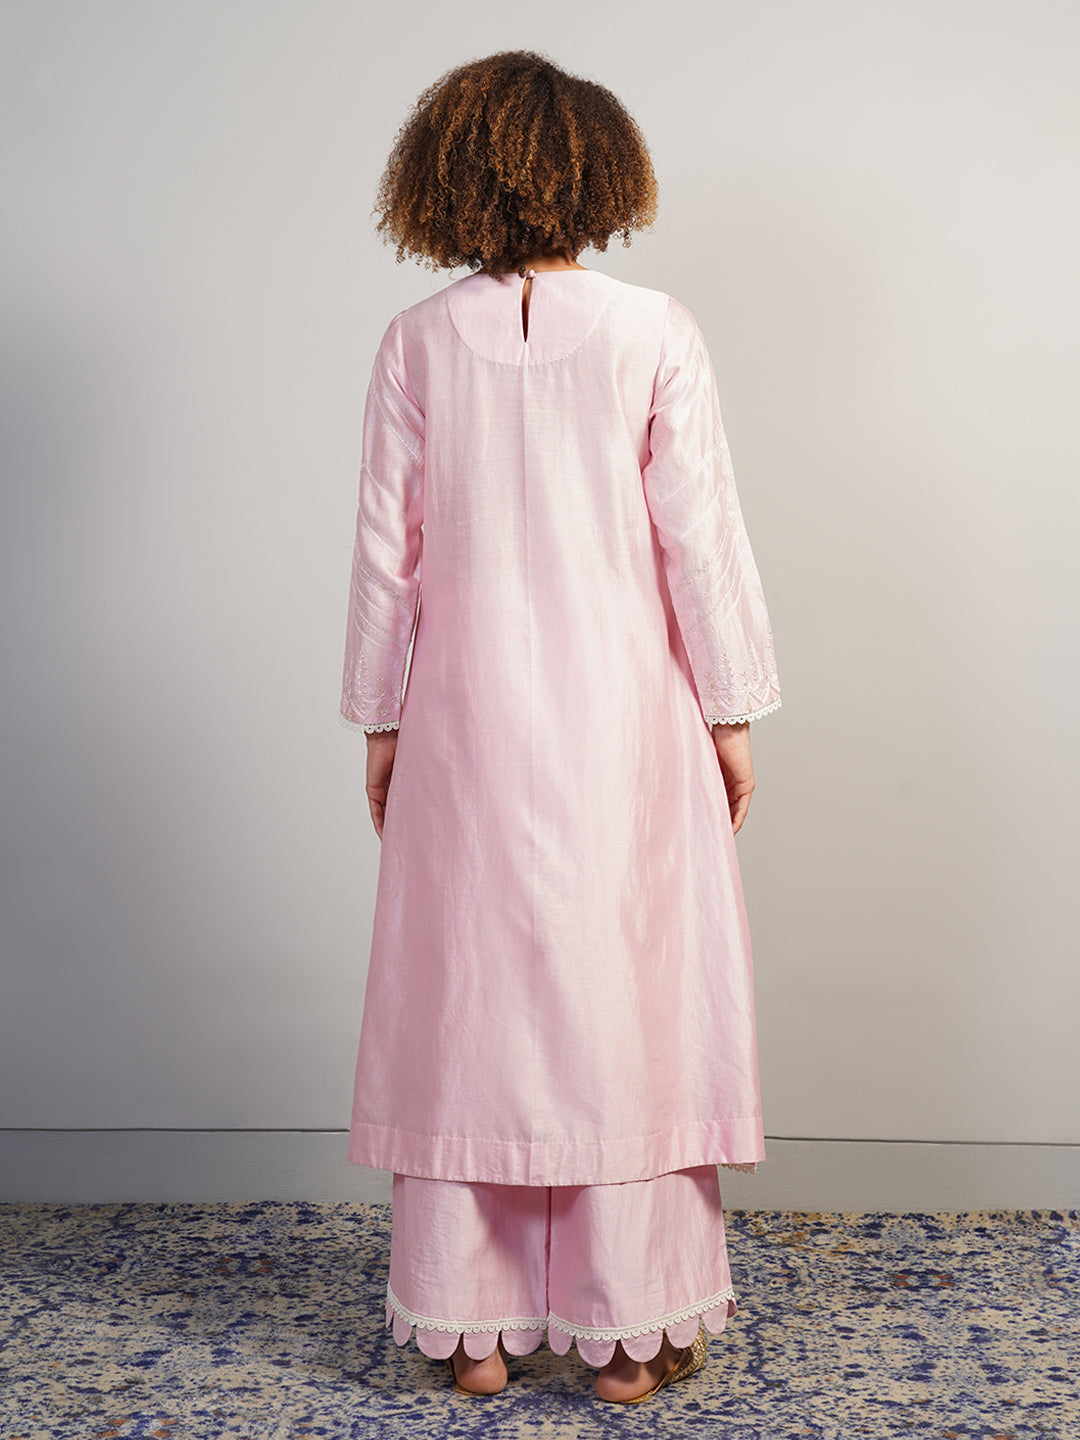 A beautiful baby pink cotton silk suit set in zero neck, adorned with intricate Aari work